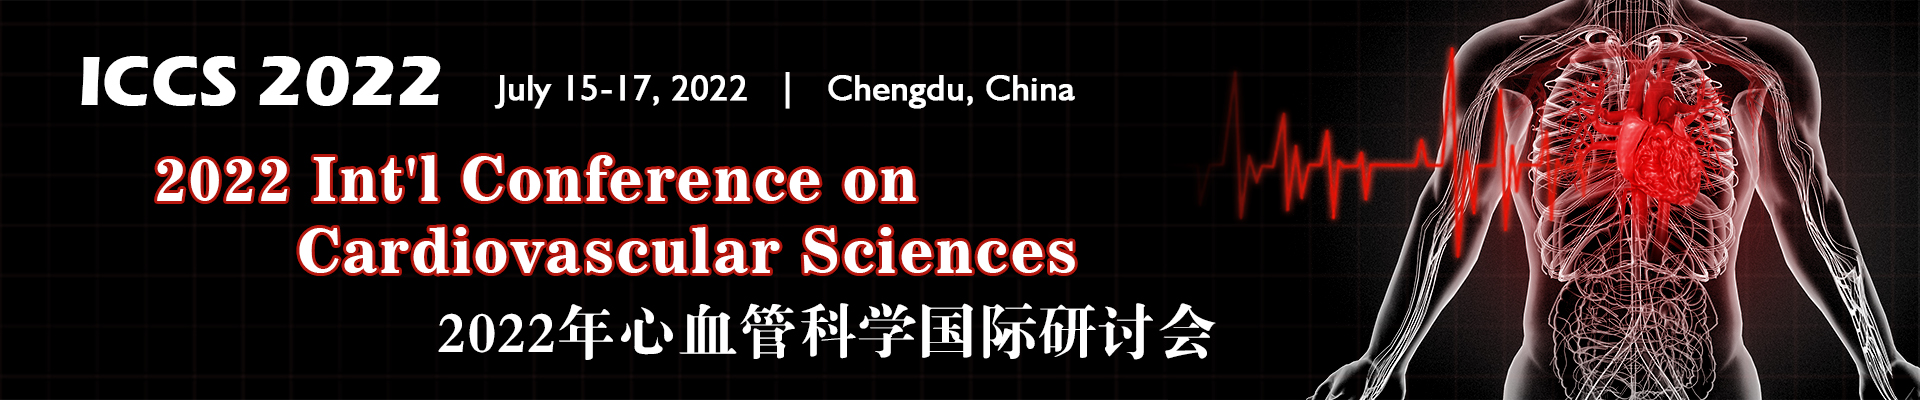 2022 International Conference on Cardiovascular Sciences (ICCS 2022)